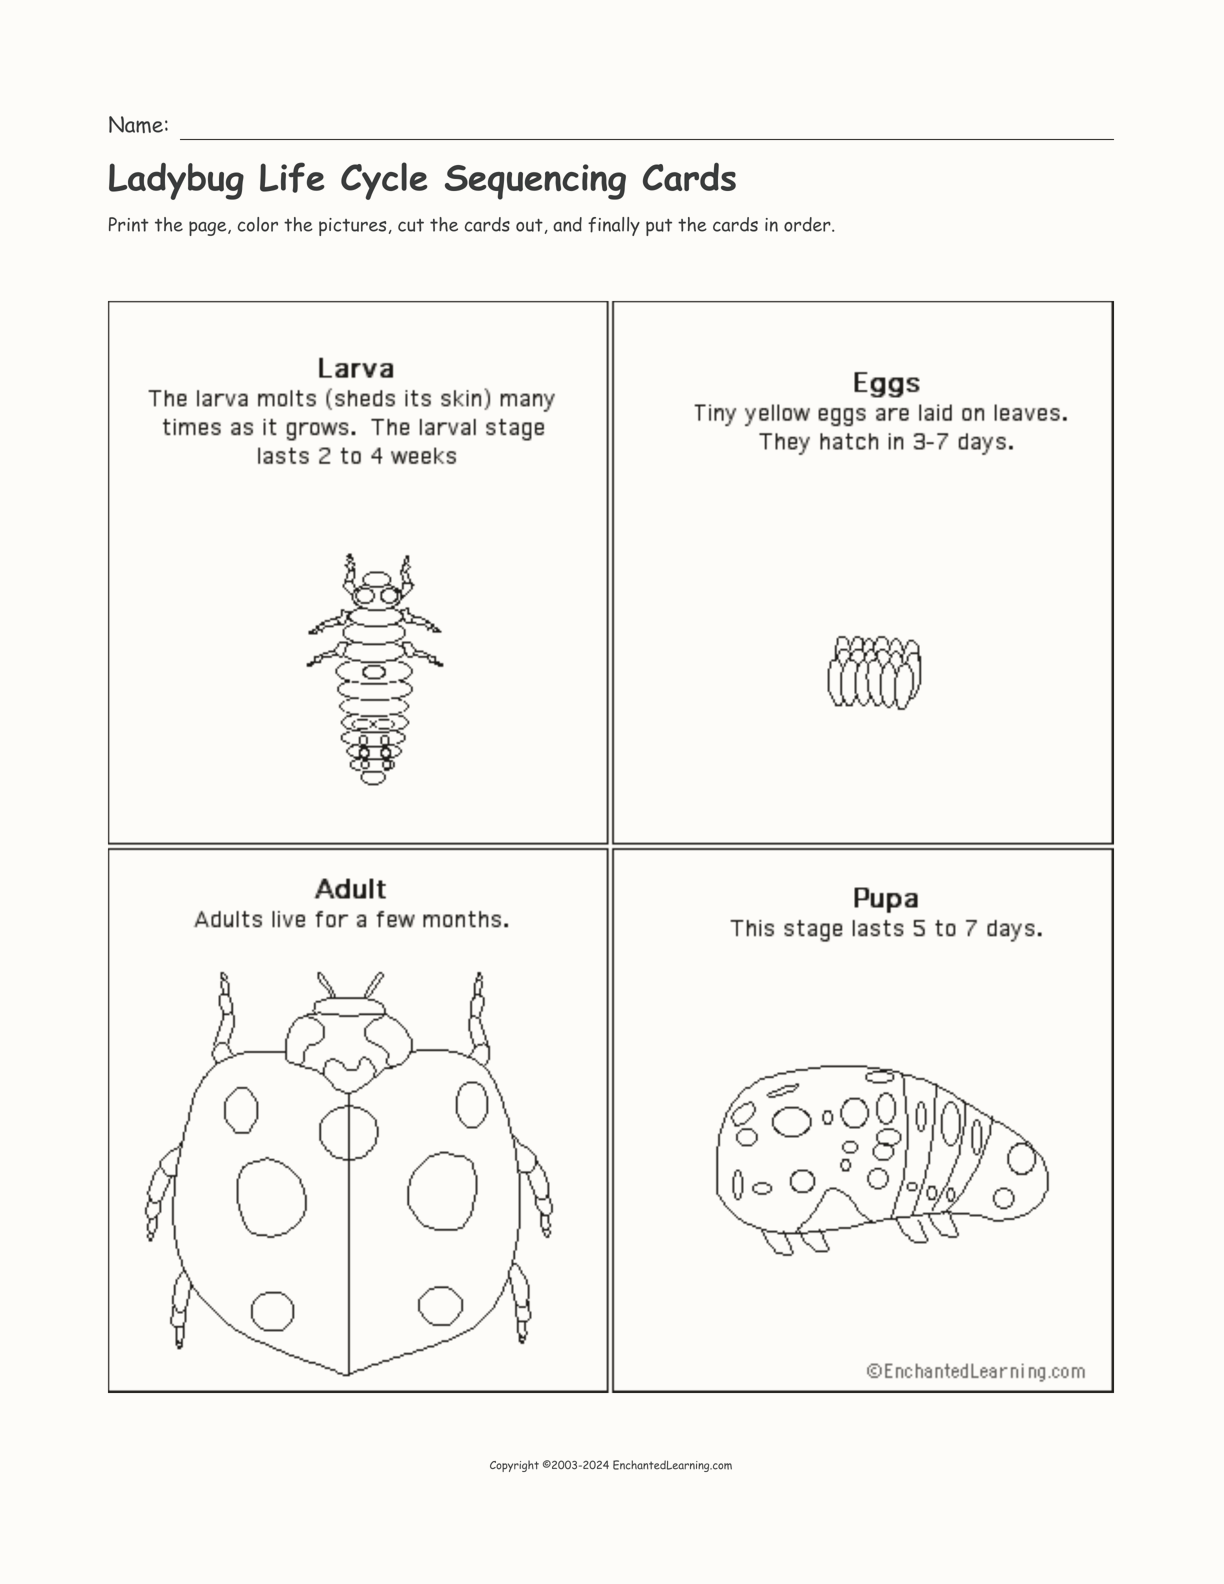 Ladybug Life Cycle Sequencing Cards interactive printout page 1